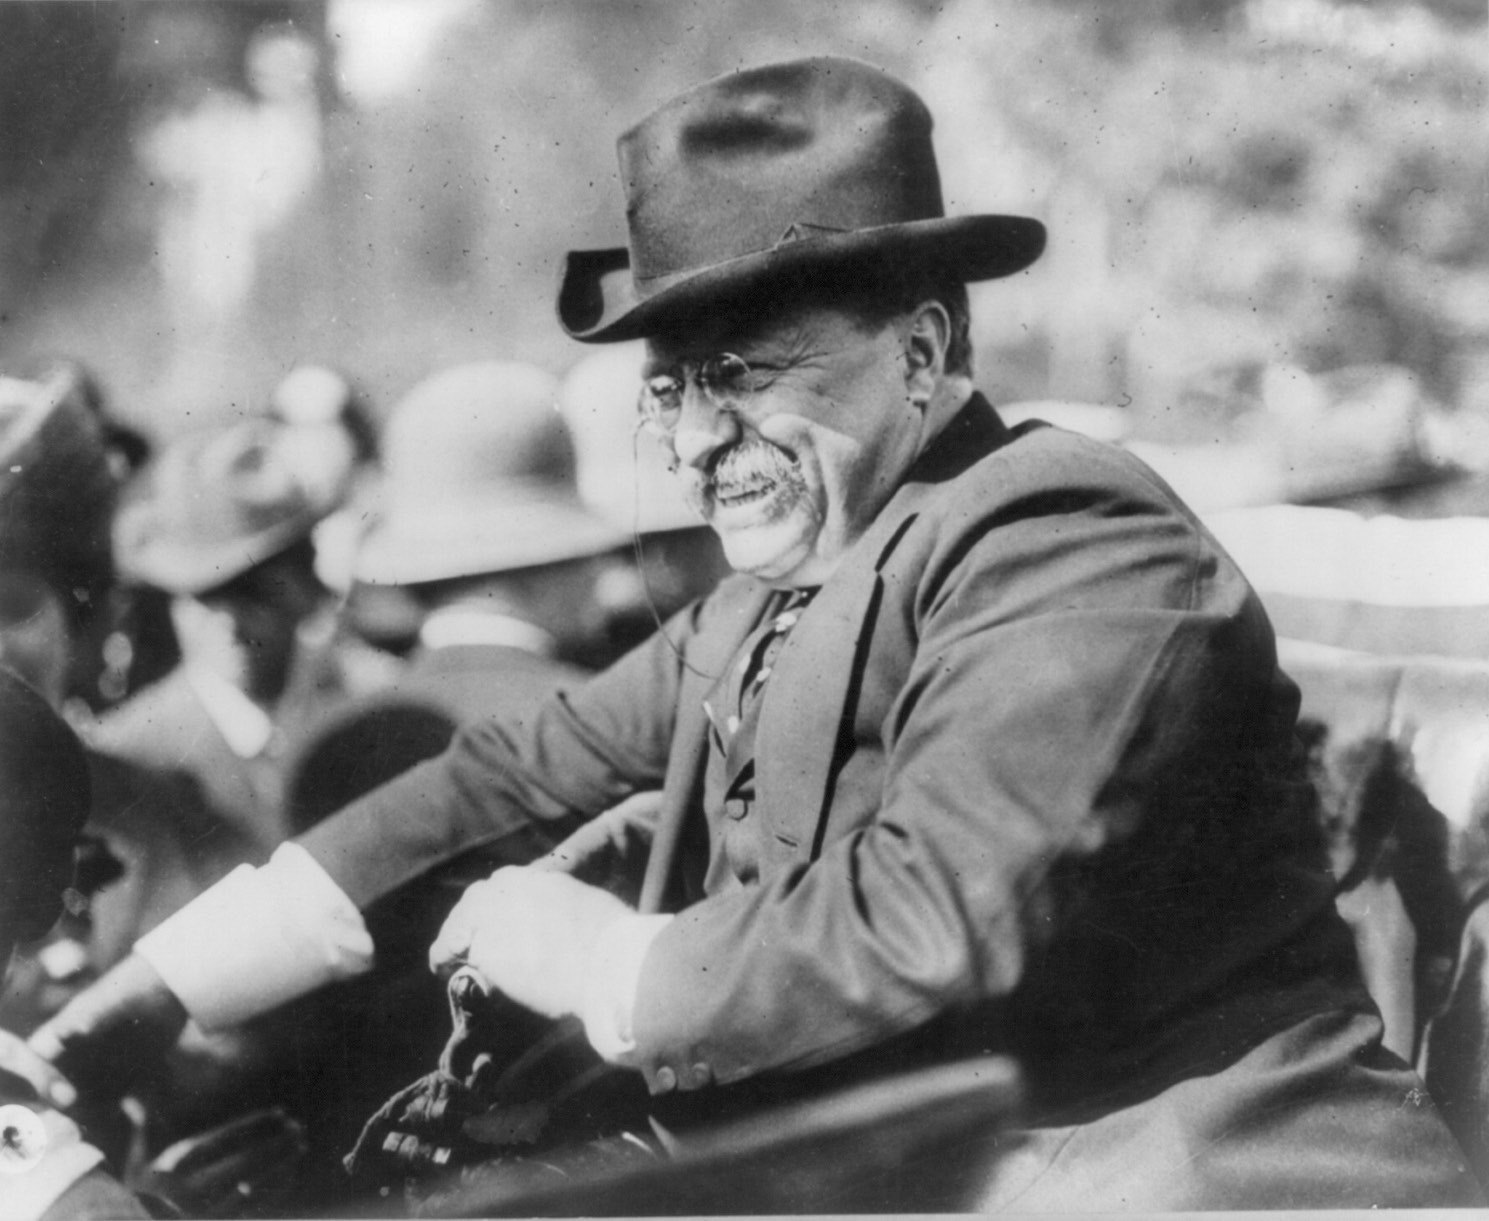 Theodore Roosevelt riding in an early automobile. American Press Association (1910).